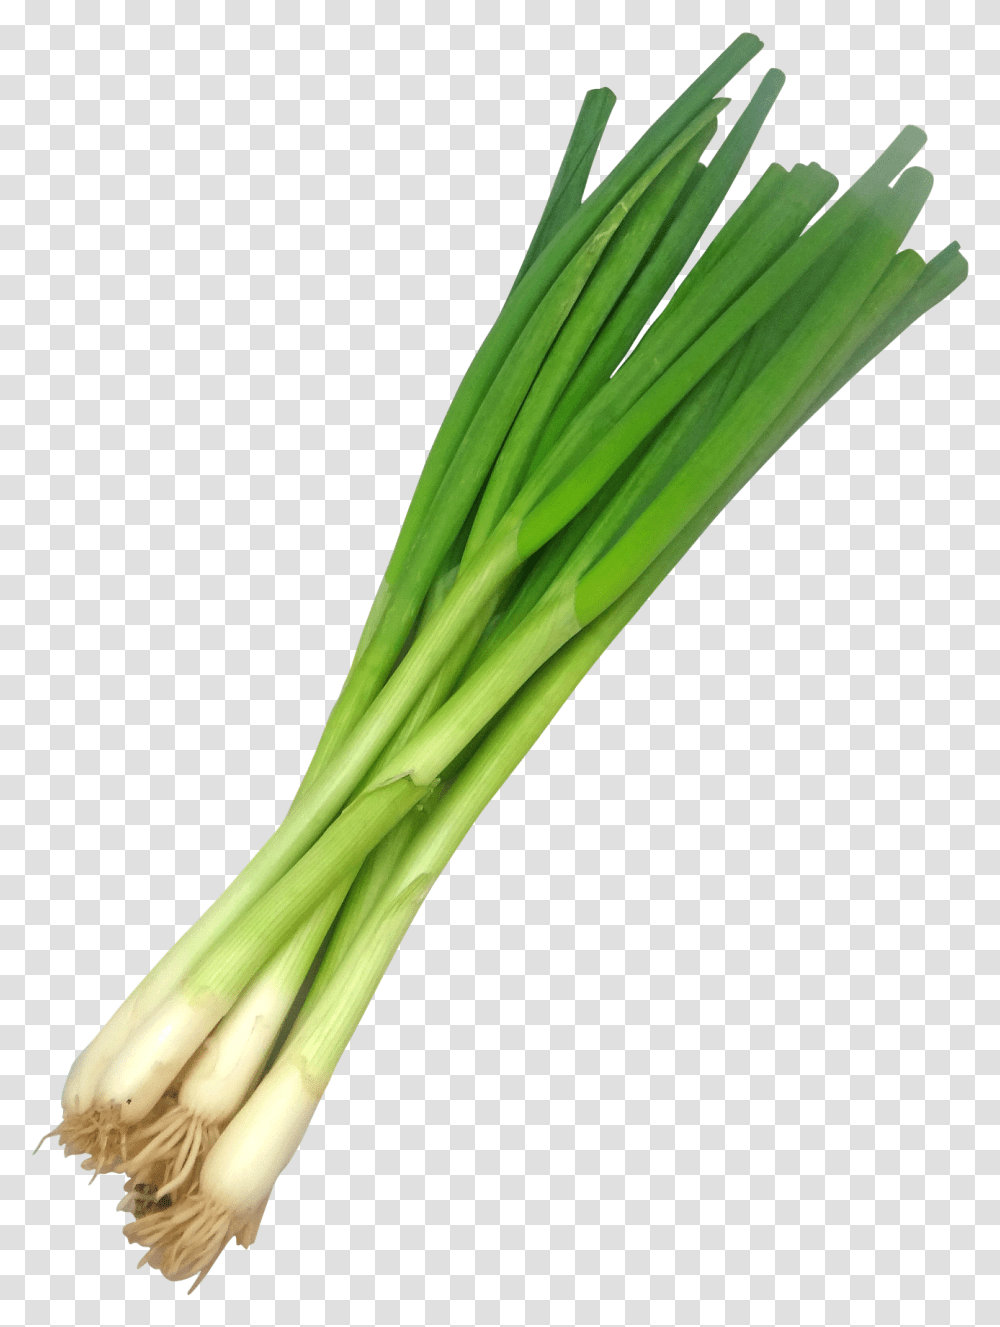 Spring Onions Background, Plant, Produce, Food, Leek Transparent Png